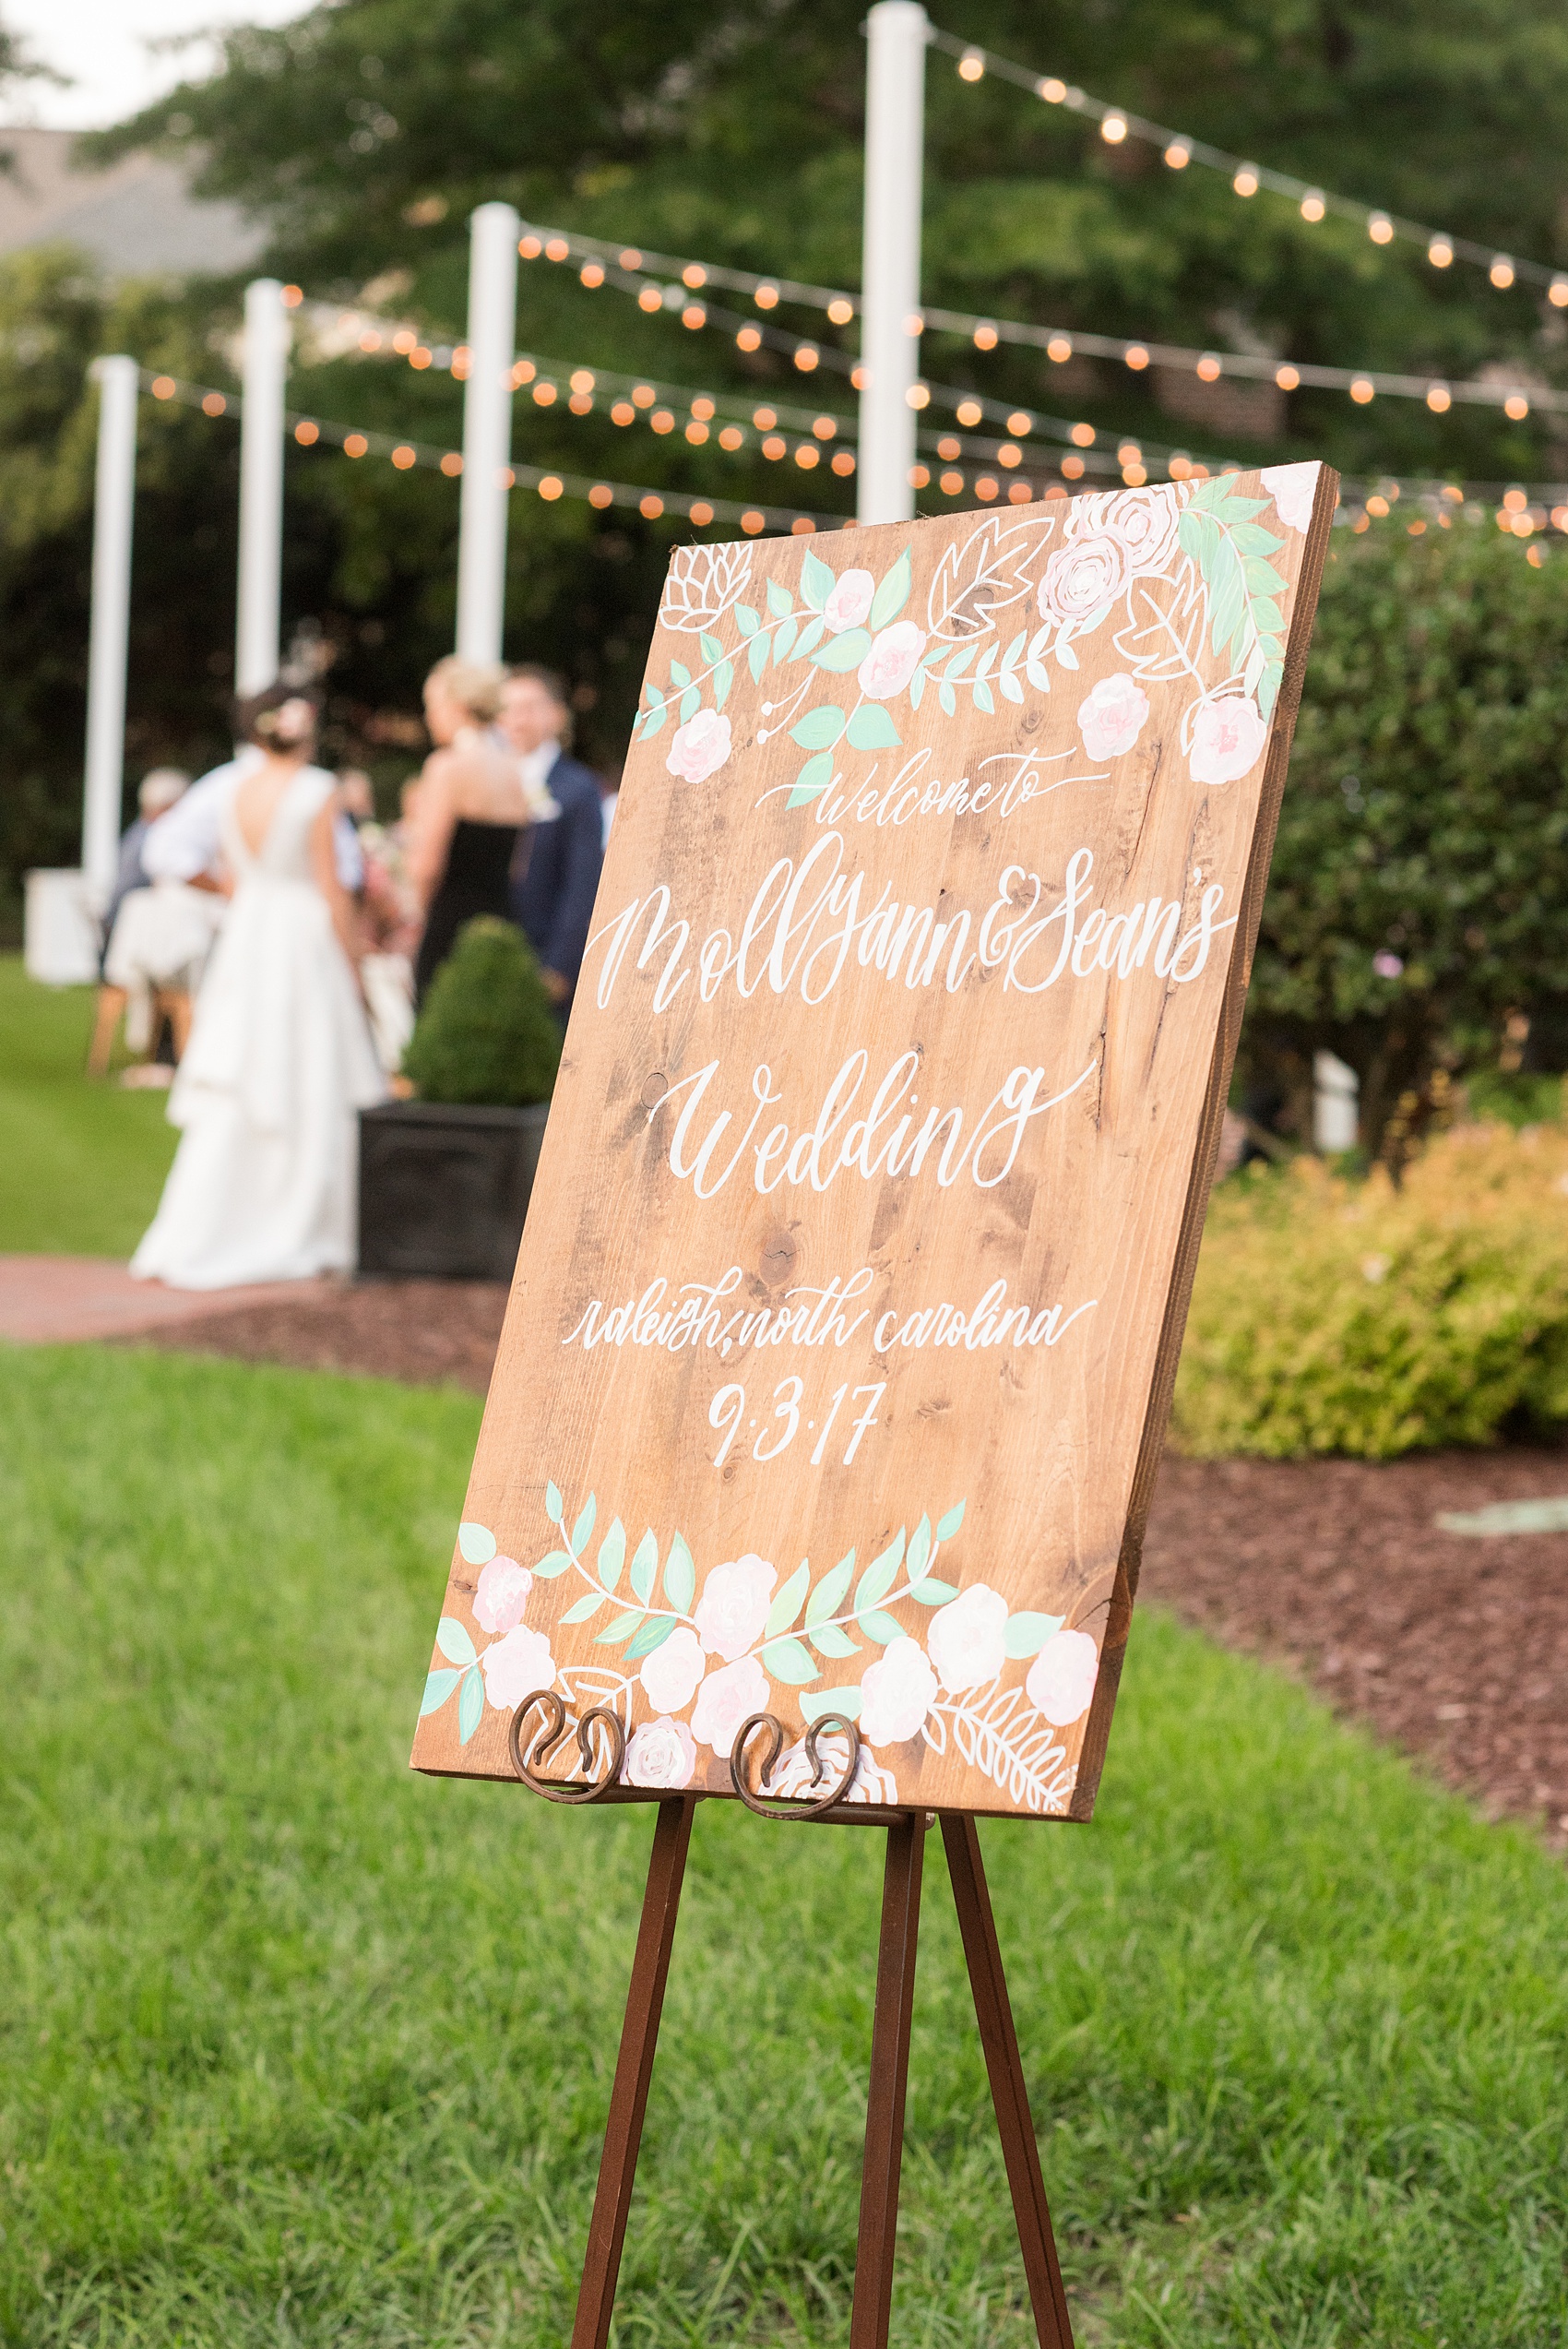 Mikkel Paige Photography pictures from a wedding at Merrimon-Wynne House in Raleigh, NC. Photo of the bride and groom's custom white script sign on wood, painted with pink and green flowers.